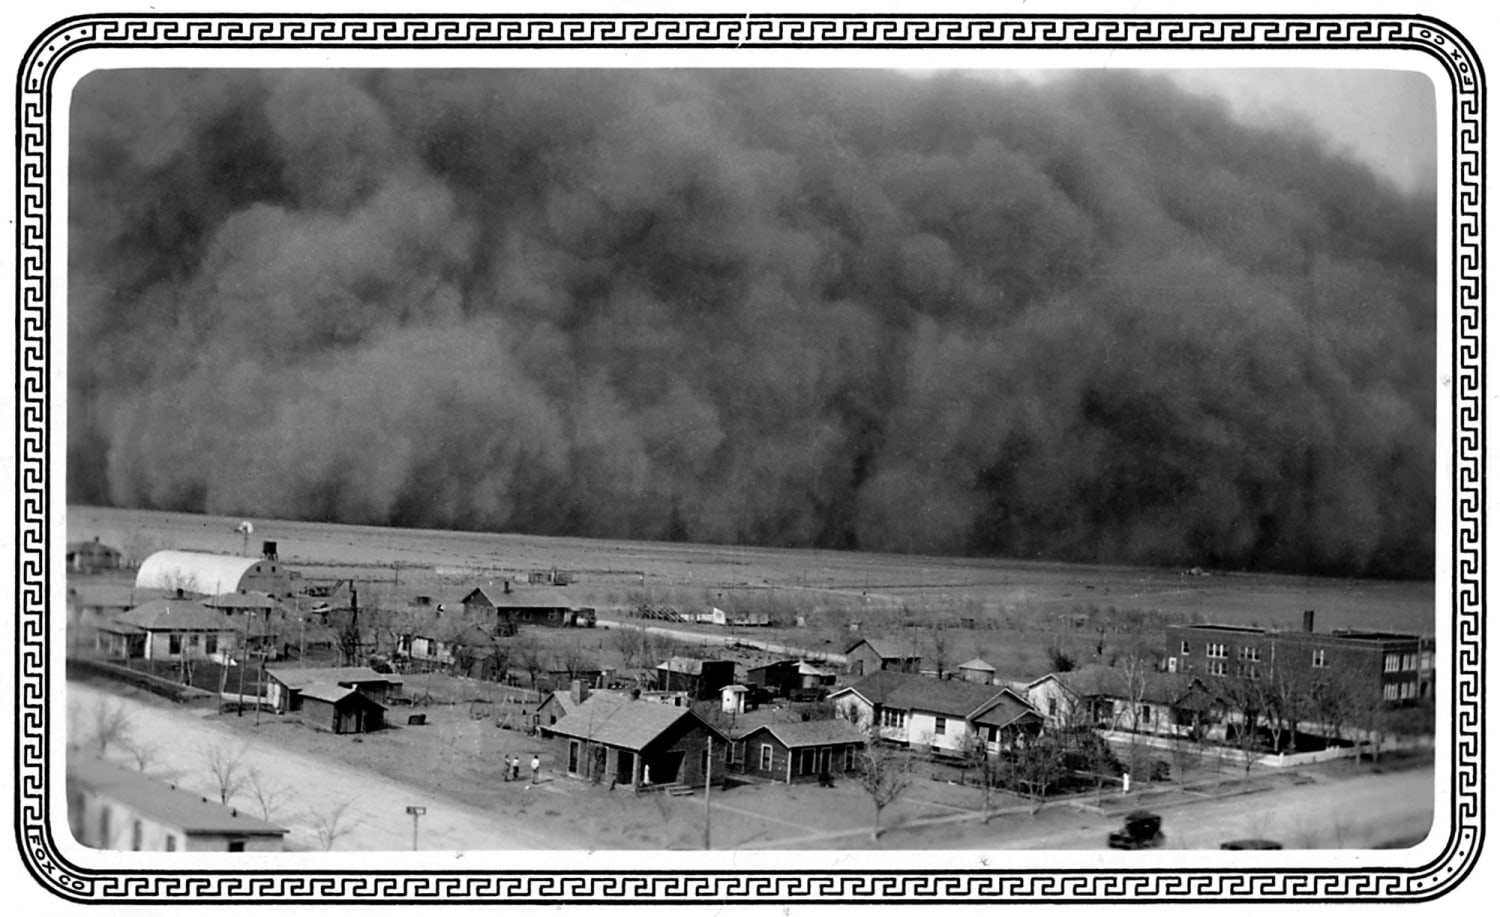 Dust storm about to engulf Rolla, Kansas. May 6, 1935.